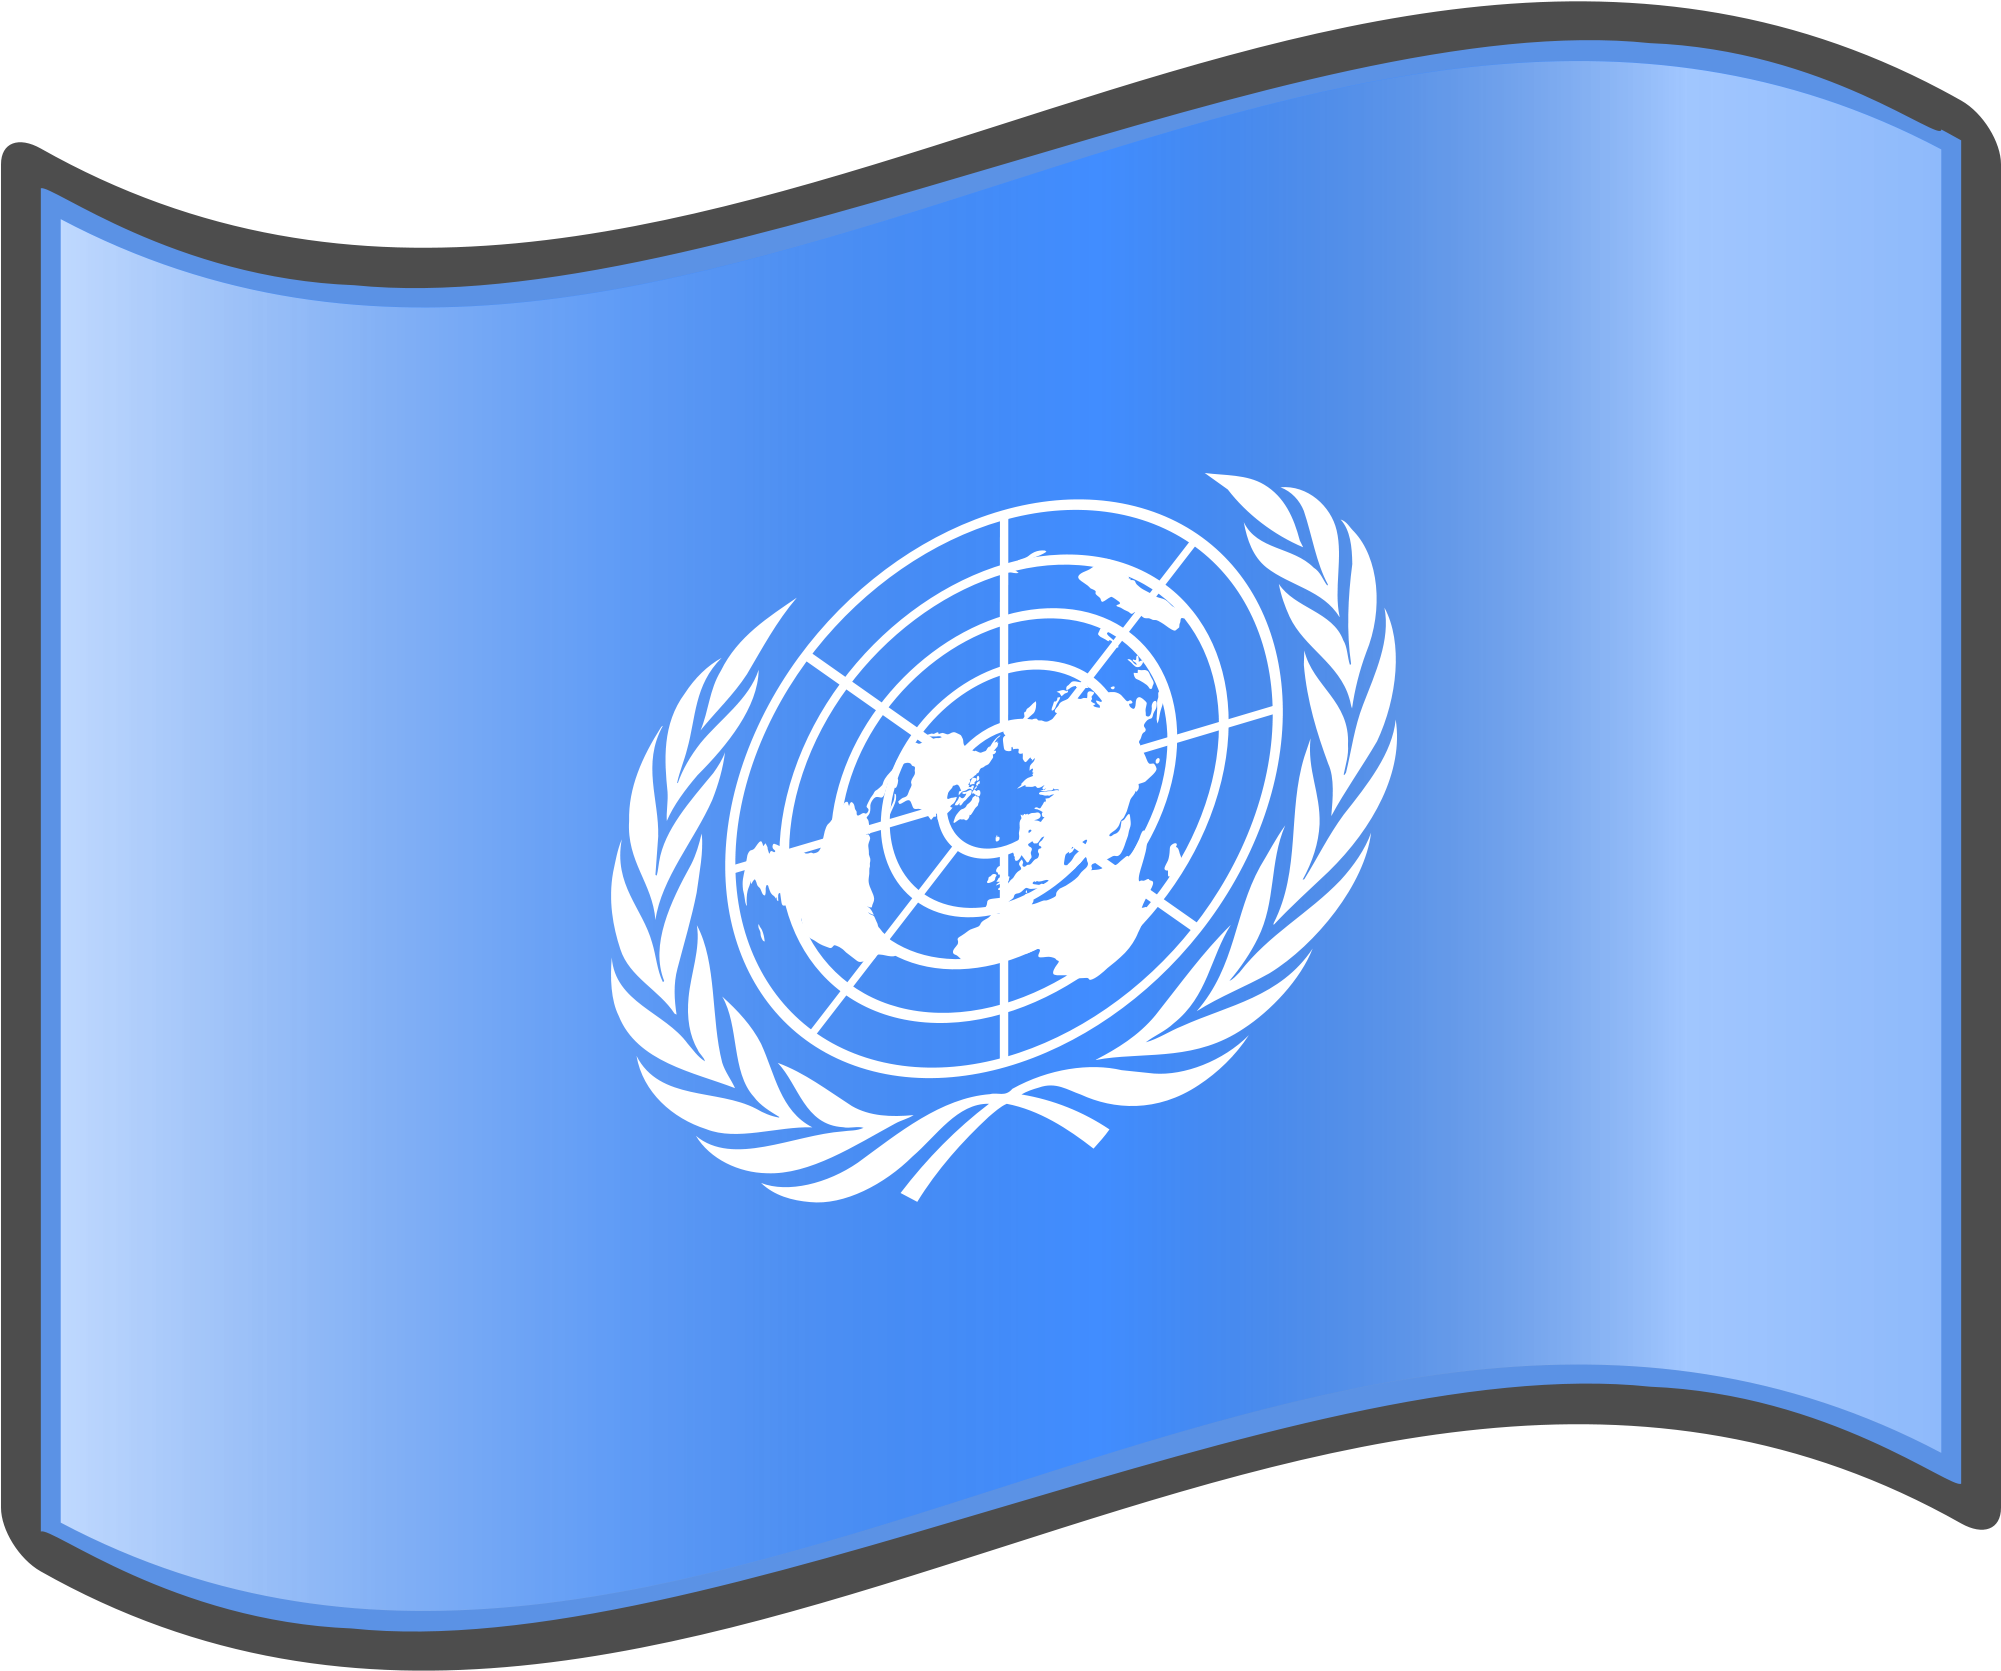 United Nations Flag Background PNG Image | PNG Play